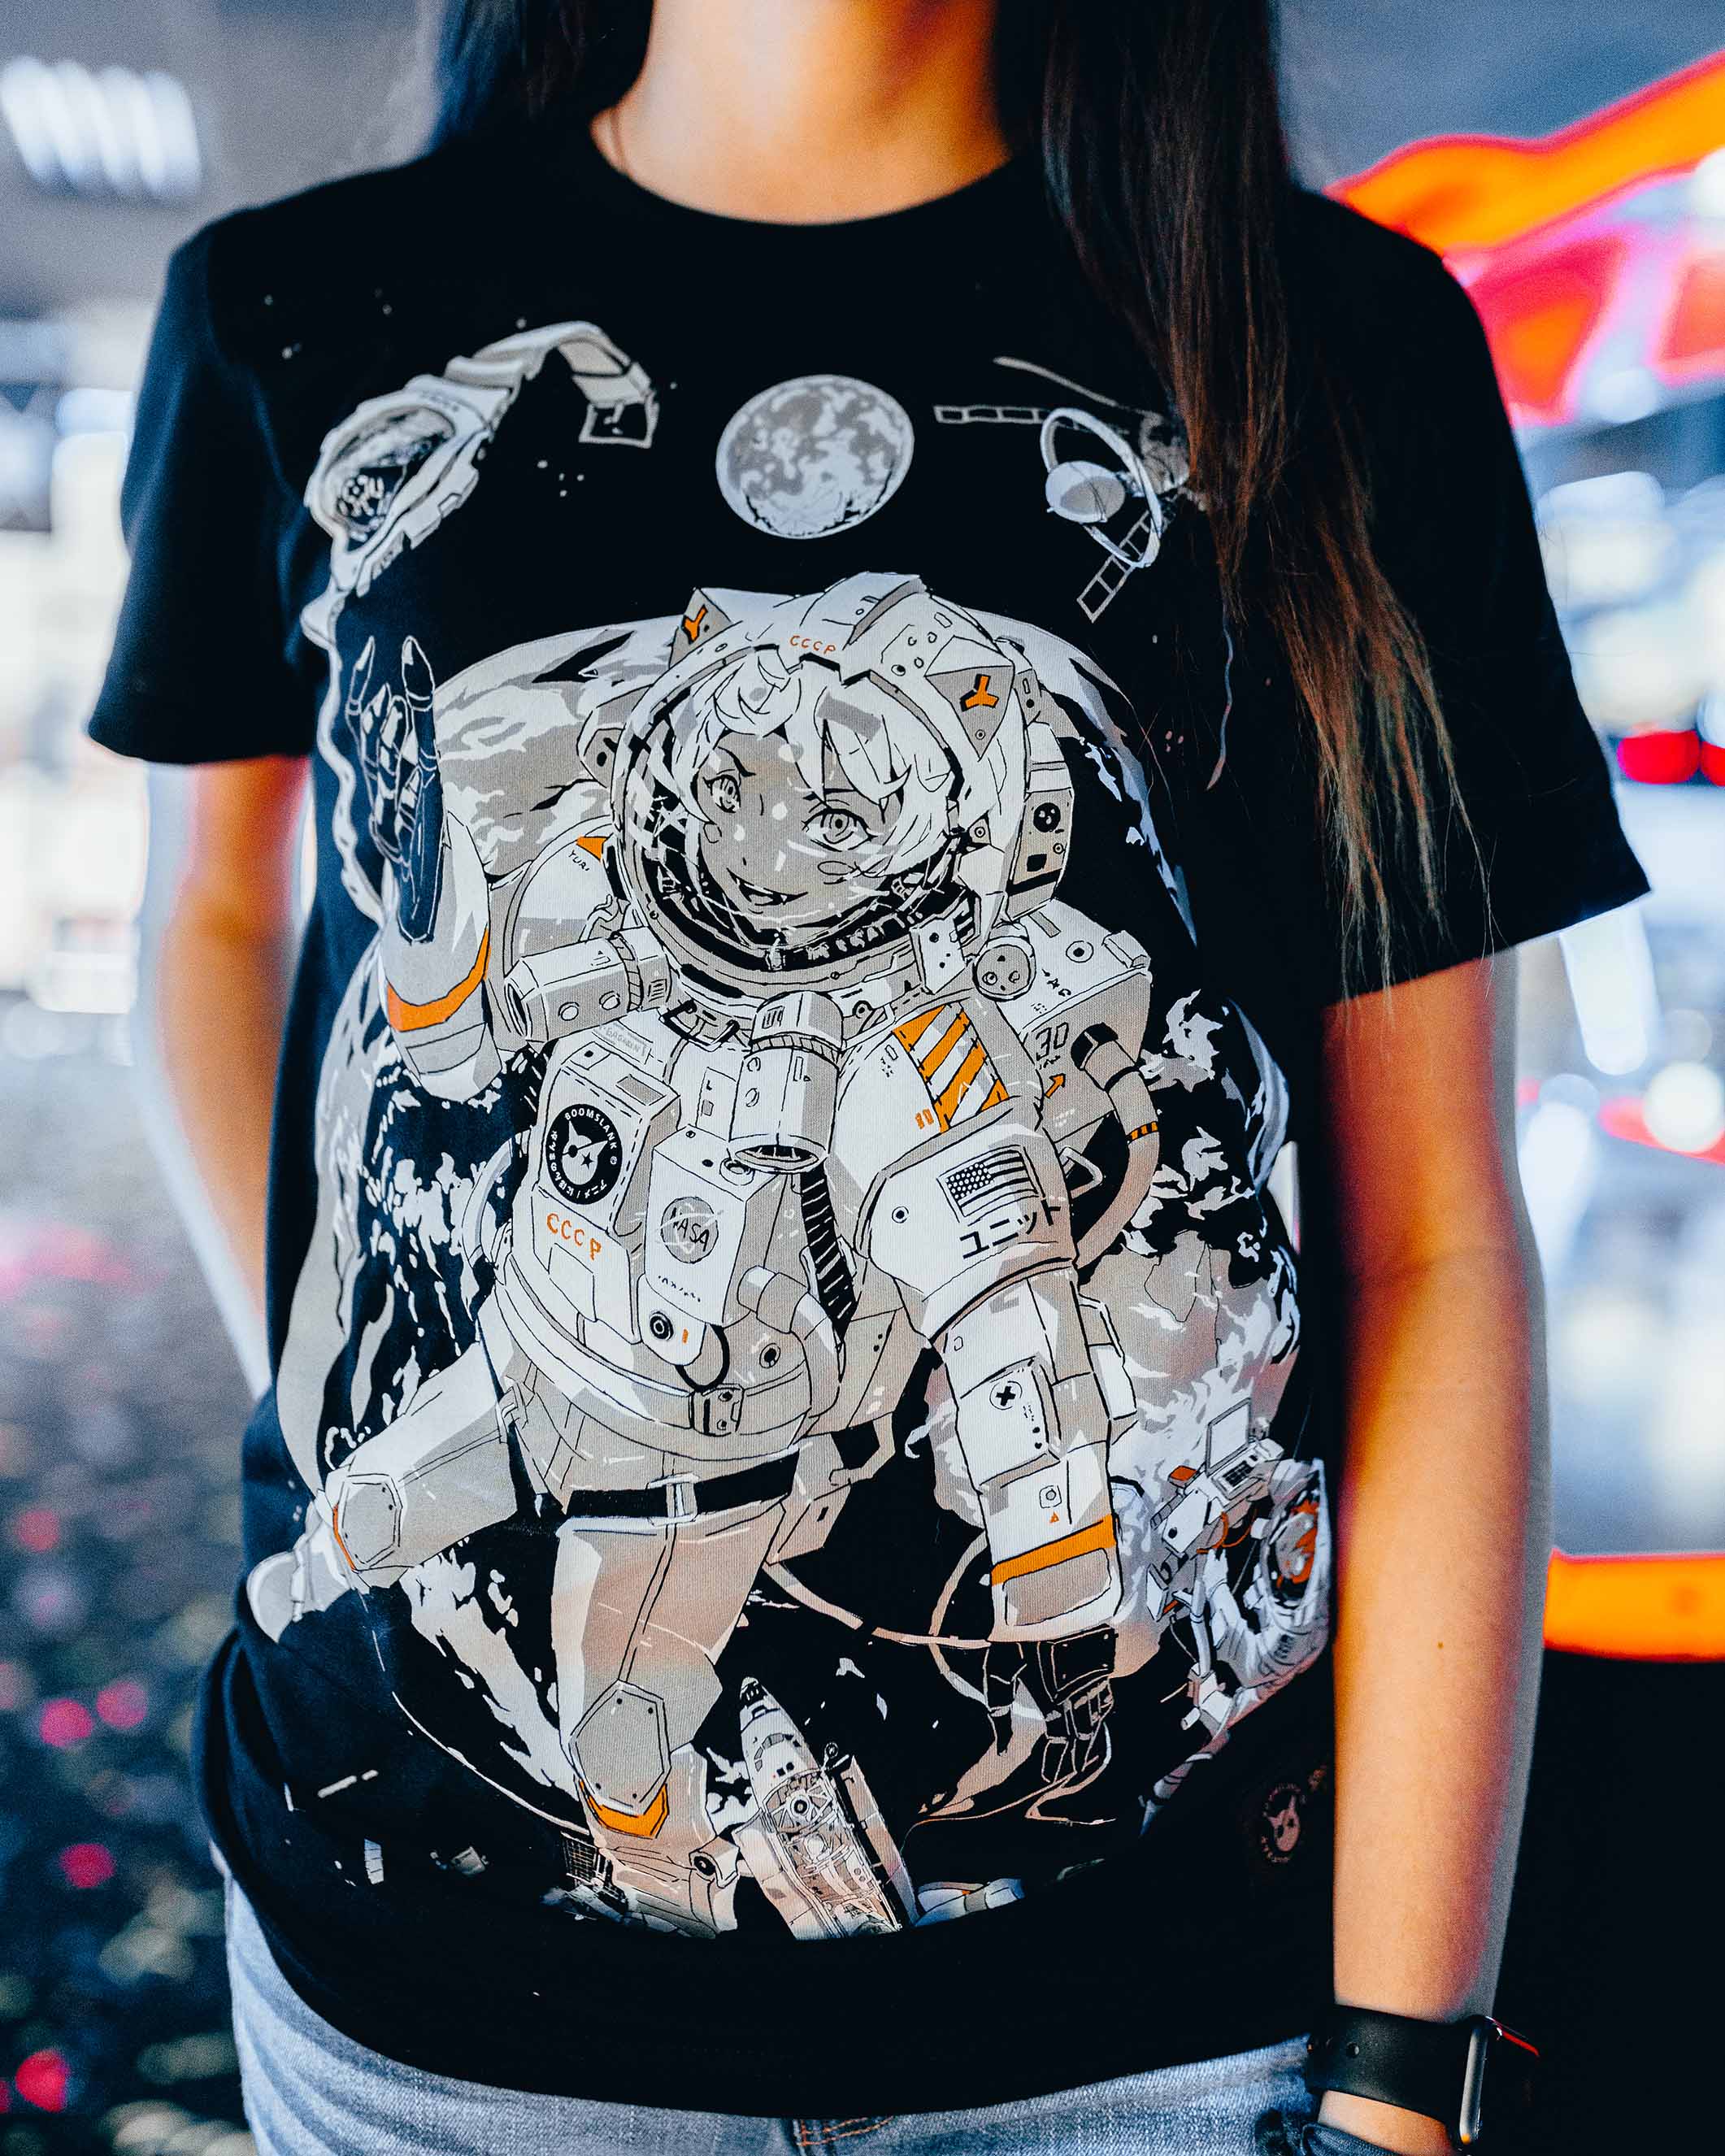 Space Cowboy anime graphic tee by Boomslank